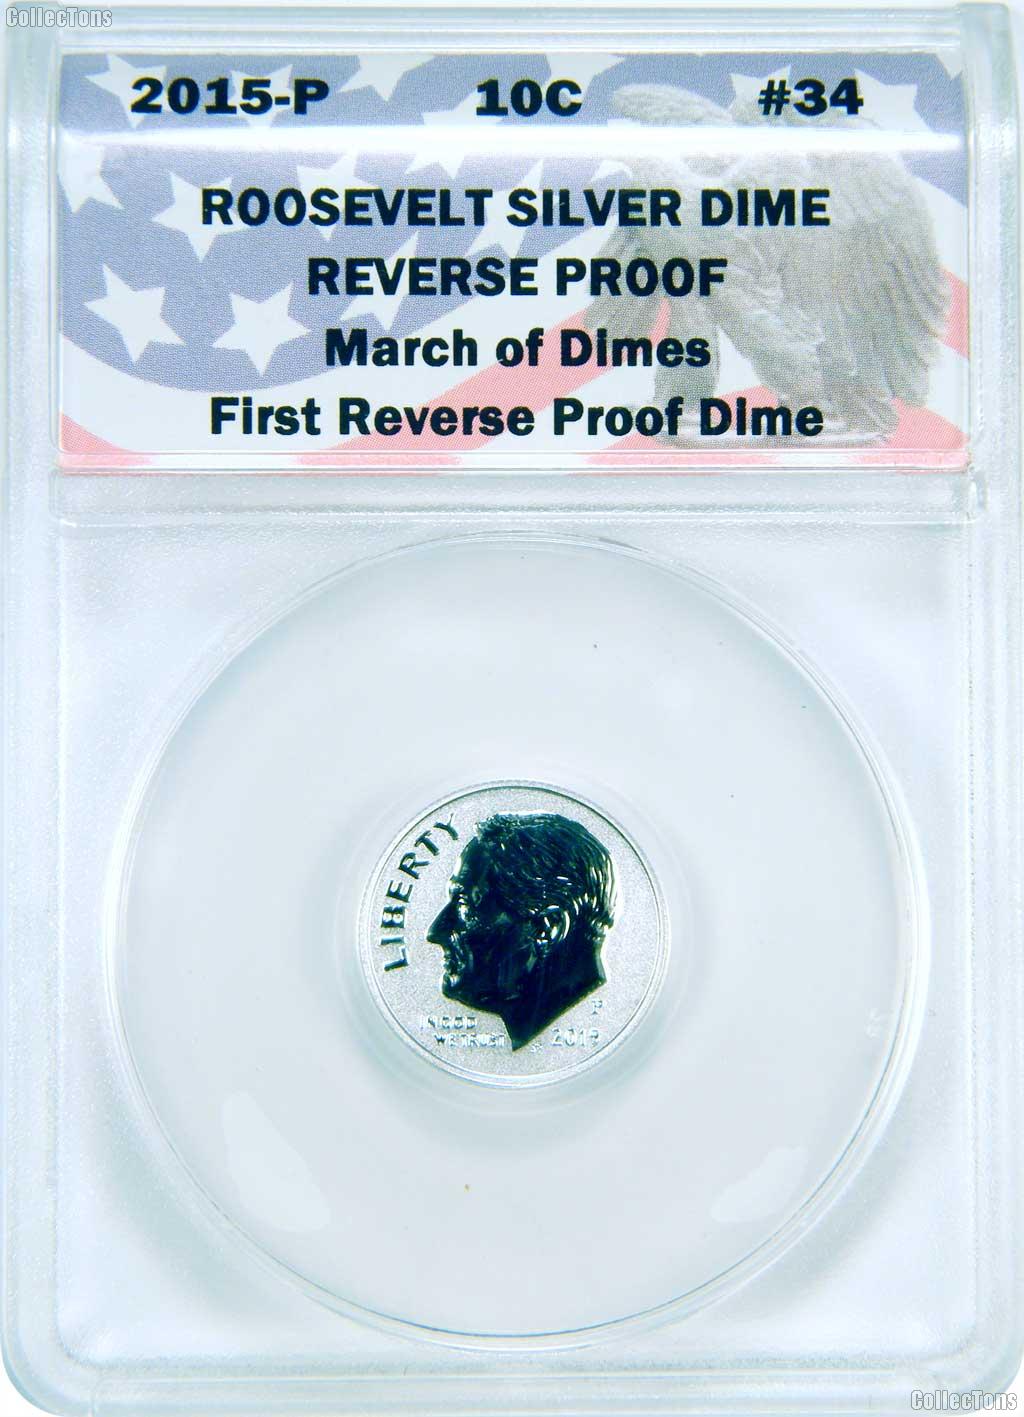 CollecTons Keepers #34: 2015-P Silver Reverse Proof Roosevelt Dime Certified in Exclusive ANACS Holder